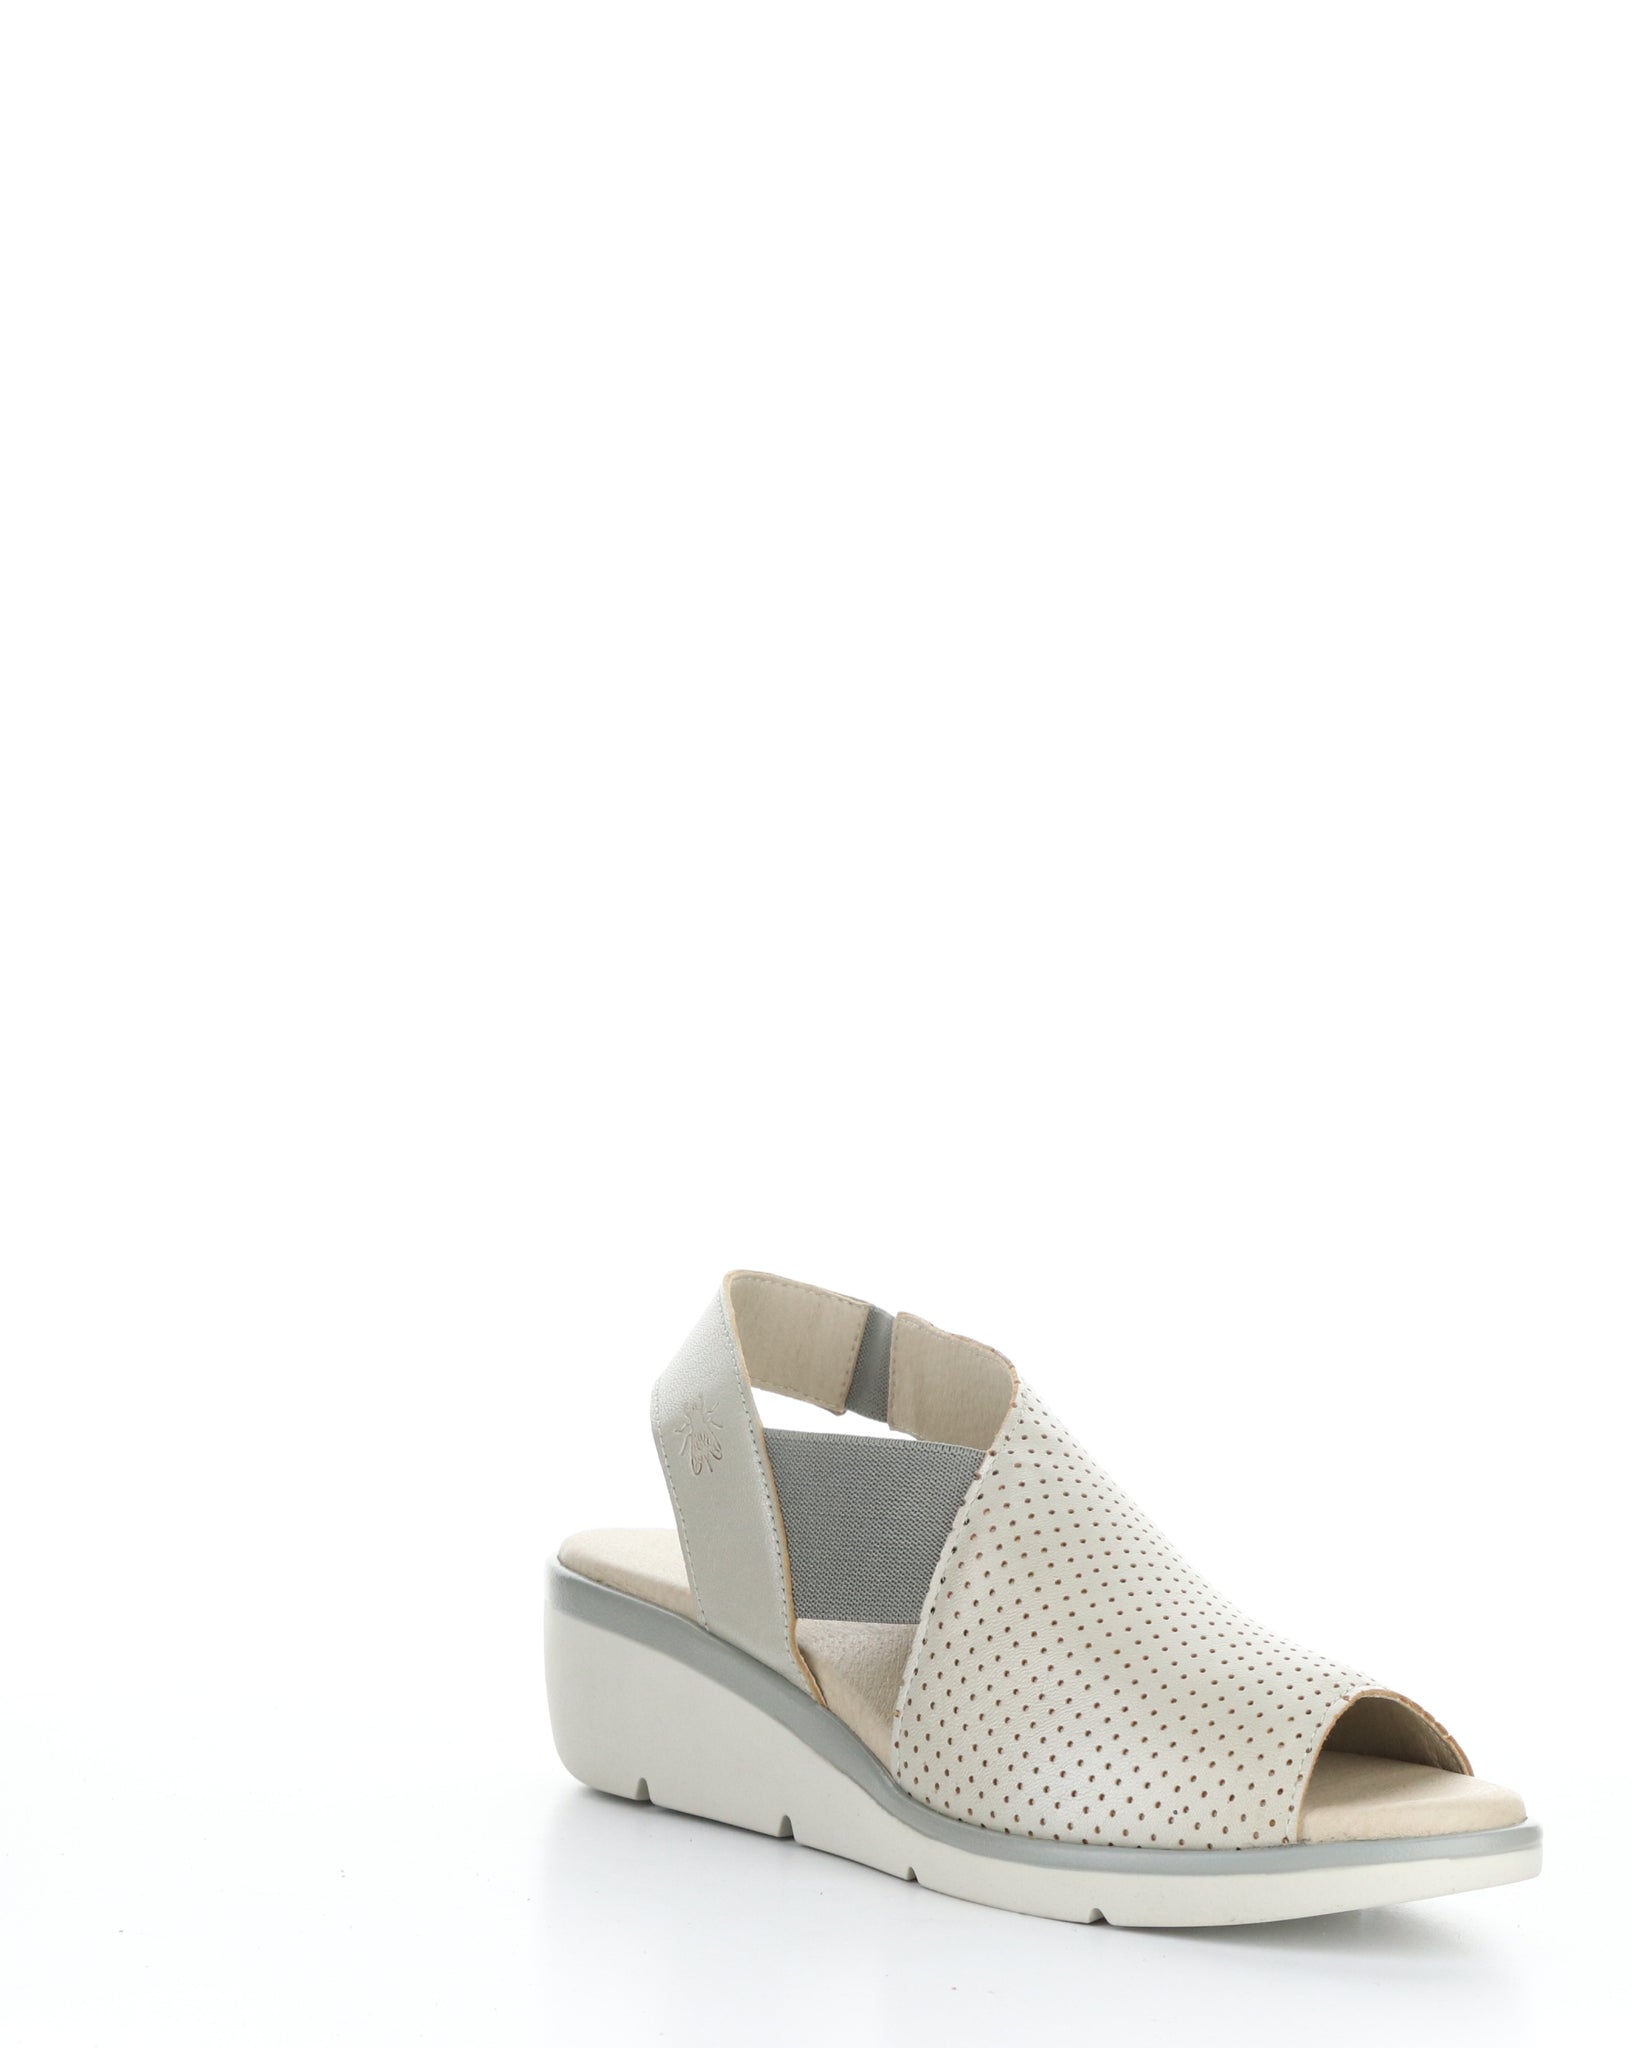 Fly London "Nisi" Silver perf low wedge sandal